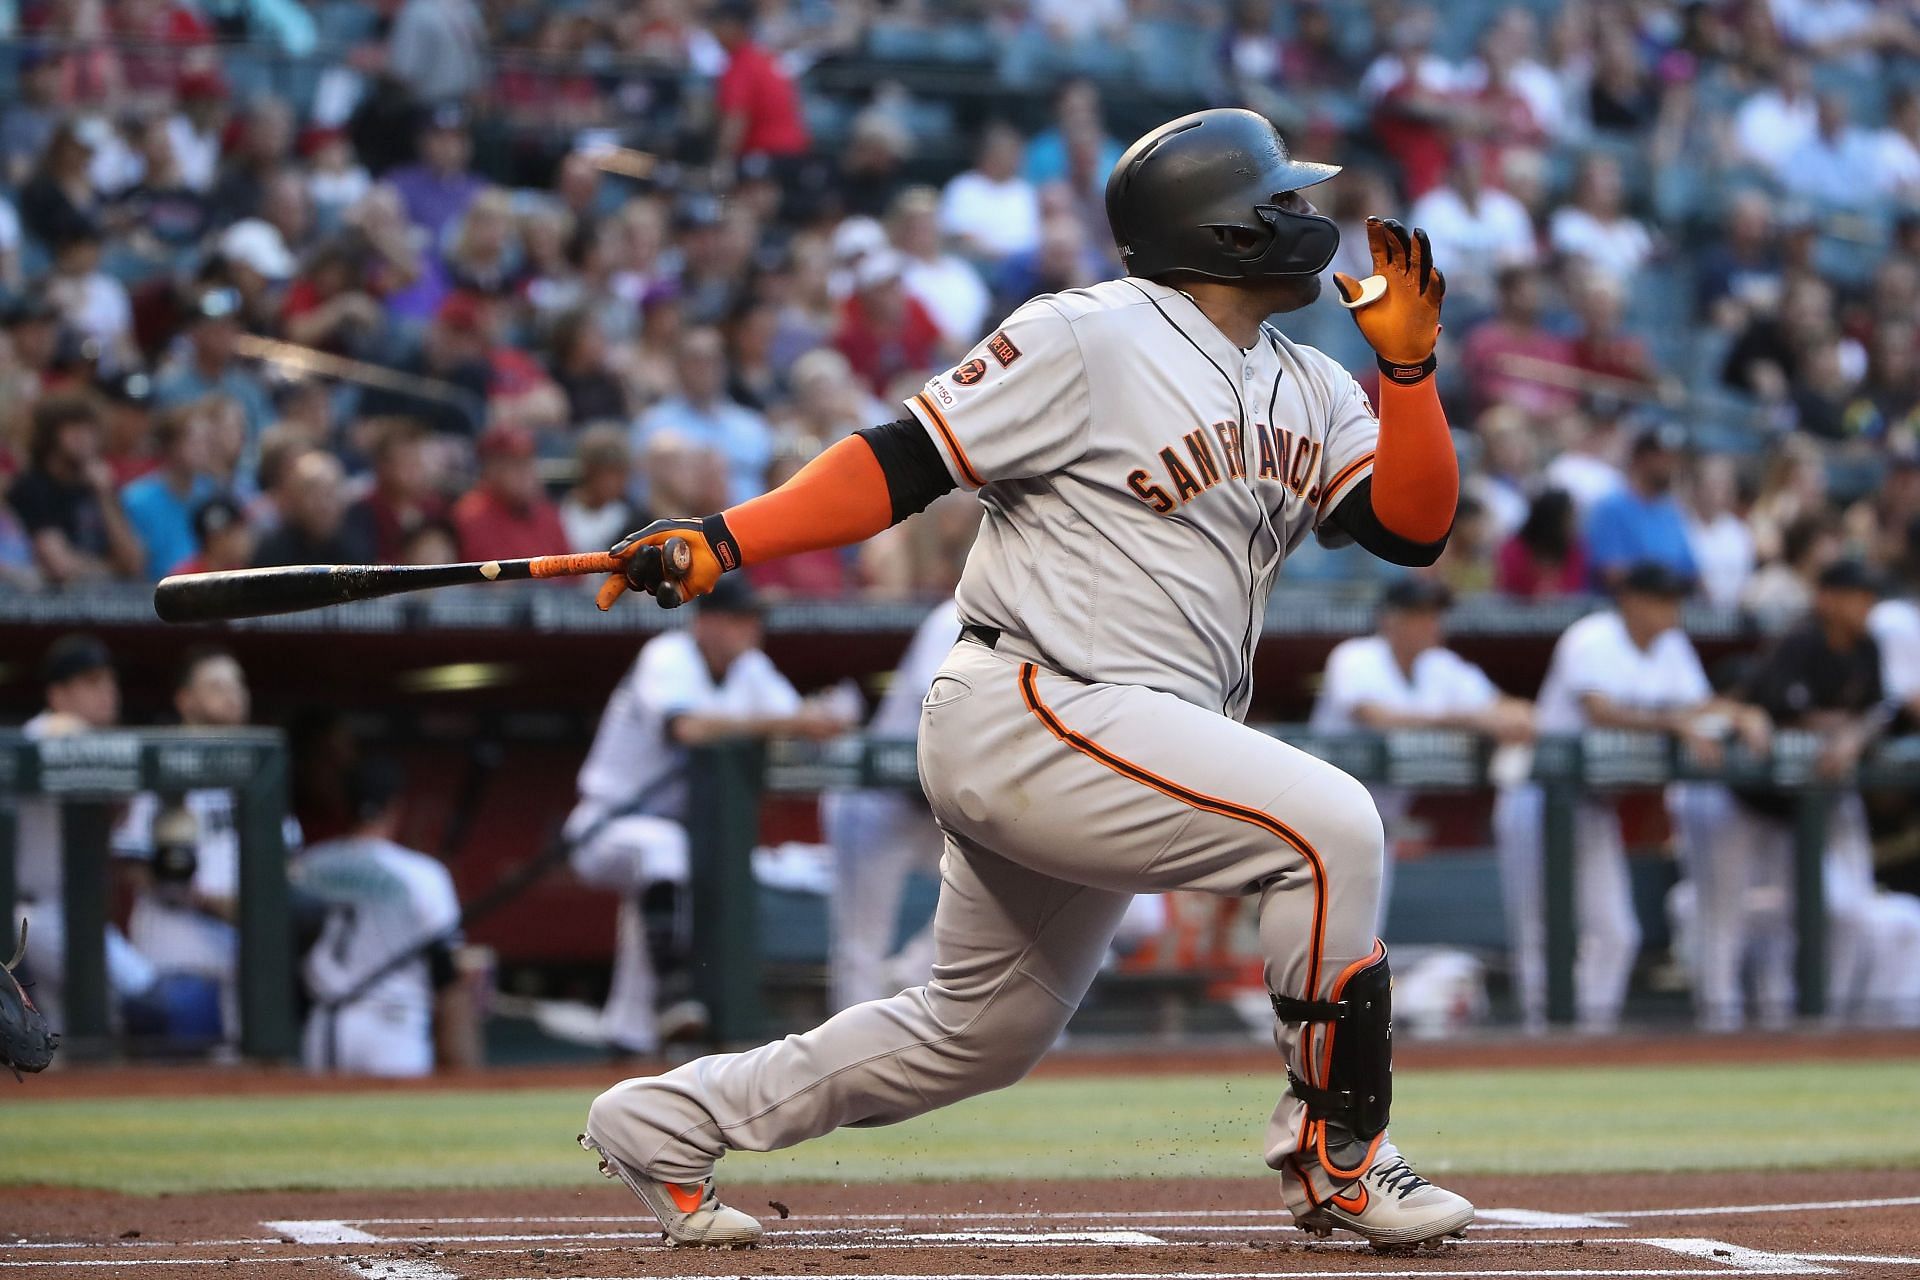 Sweet Jesus, did he kill him? The Venezuelan nightmare - Baseball World  reacts to former San Francisco Giants slugger Pablo Sandoval demolishing  catcher at home plate in Mexican Baseball League game